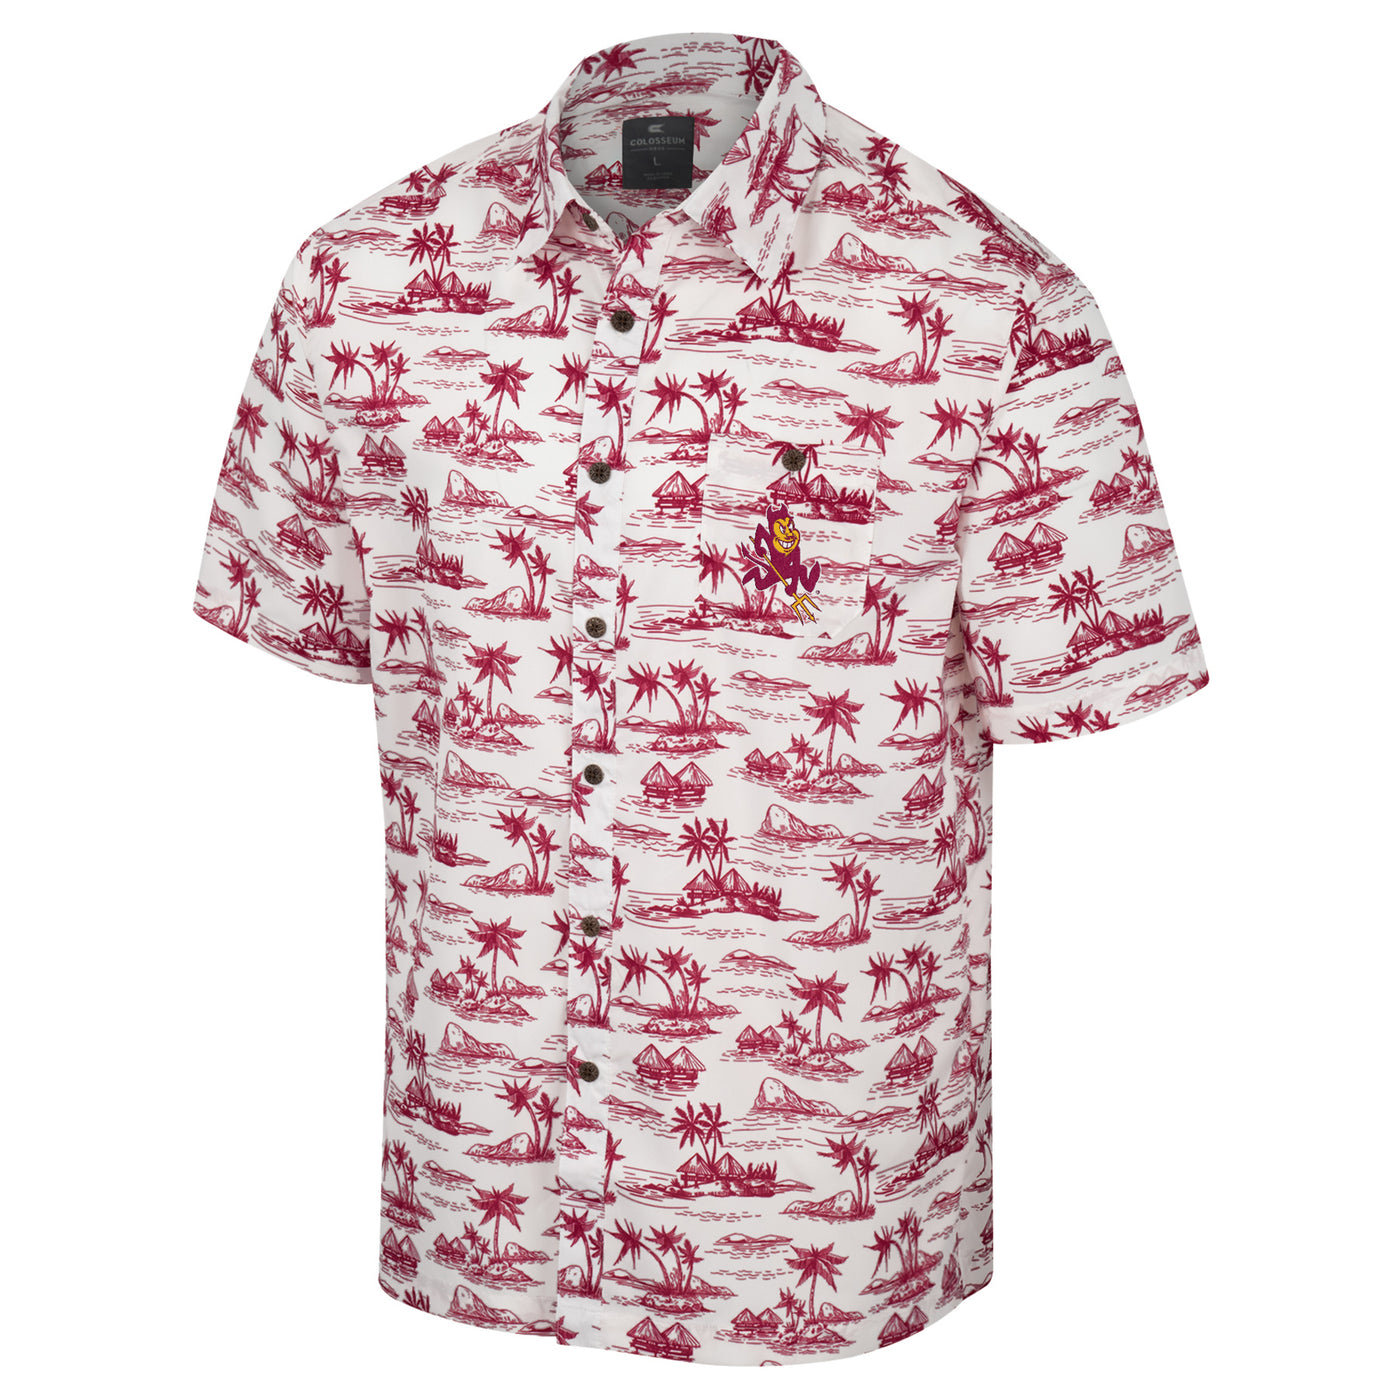 ASU white short sleeve button up with a maroon pattern of islands with palm trees. Sparky embroidered on chest pocket.  